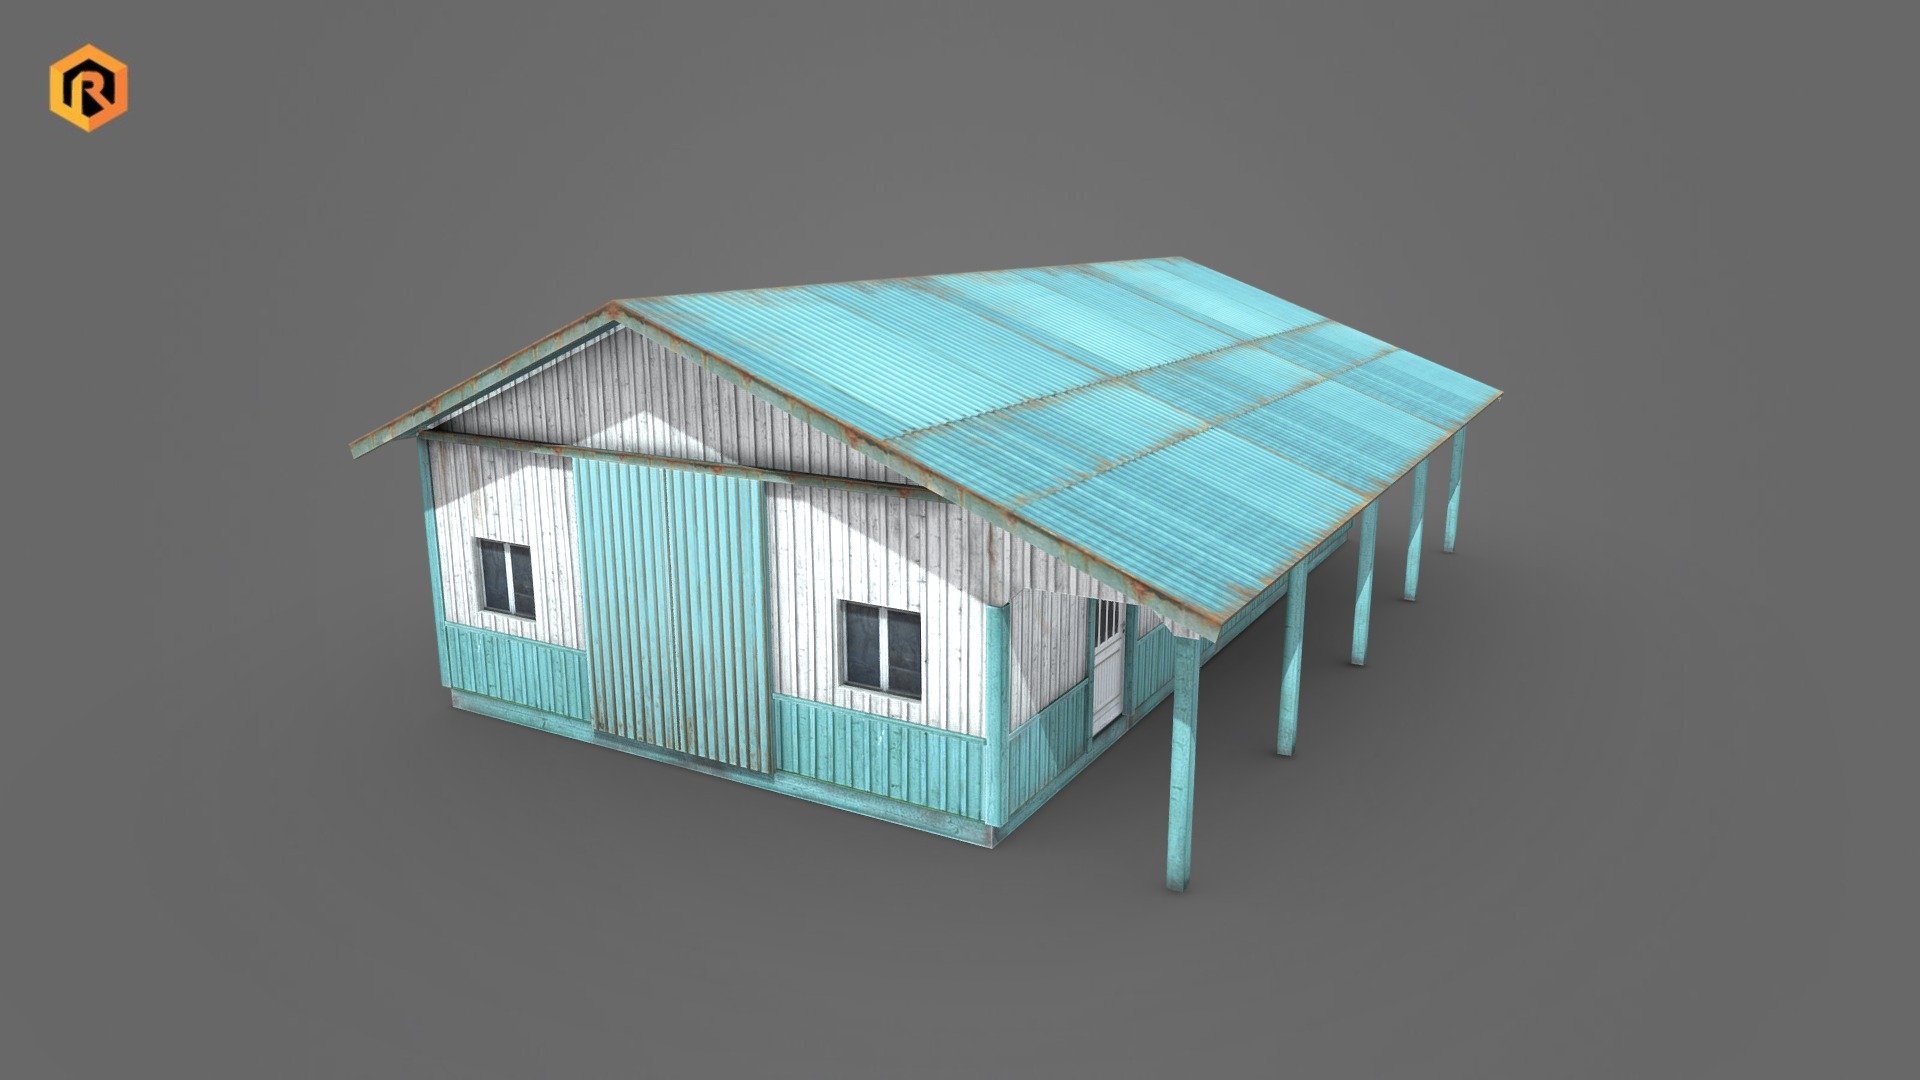 Low-poly 3D model of Big Metal Warehouse.

It is best for use in games and other VR / AR, real-time applications such as Unity or Unreal Engine. Model is built with great attention to detail and realistic proportions with correct geometry.

Technical details:


1024 Diffuse and AO texture set
1093 Triangles
785 Vertices
Model is one mesh.
Pivot point centered at world origin.
Model scaled to approximate real world size (centimeters).
All nodes, materials and textures are appropriately named.

More file formats are available in additional zip file on product page.

Please feel free to contact me if you have any questions or need any support for this asset.

Support e-mail: support@rescue3d.com - Big Metal Warehouse - Buy Royalty Free 3D model by Rescue3D Assets (@rescue3d) 3d model